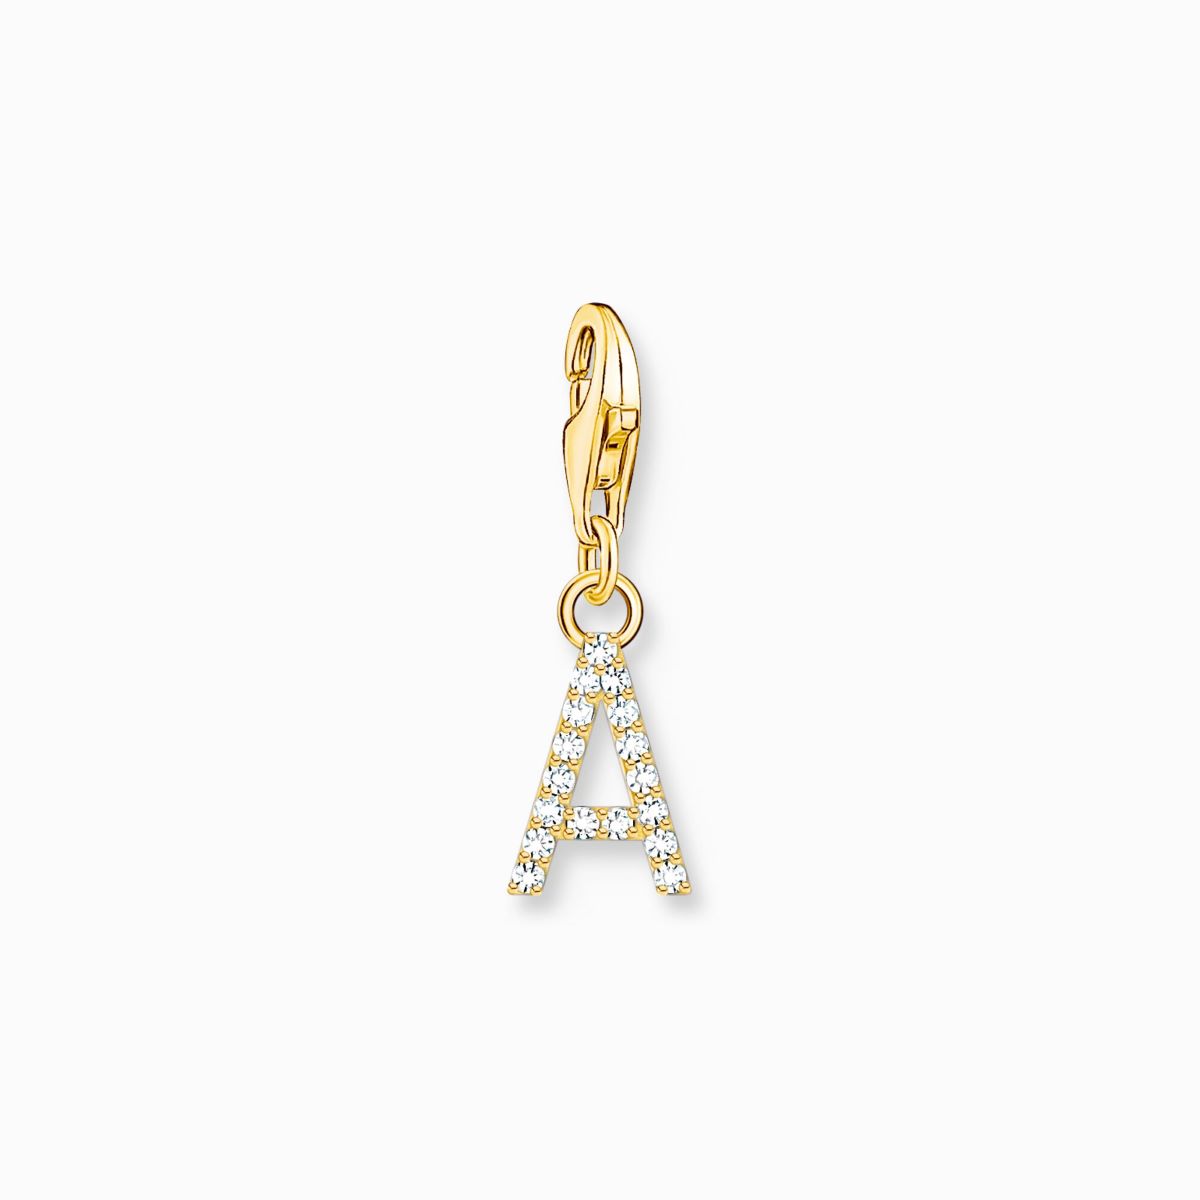 Thomas Sabo Gold Plated Letter A Charm with CZ -1964-414-14